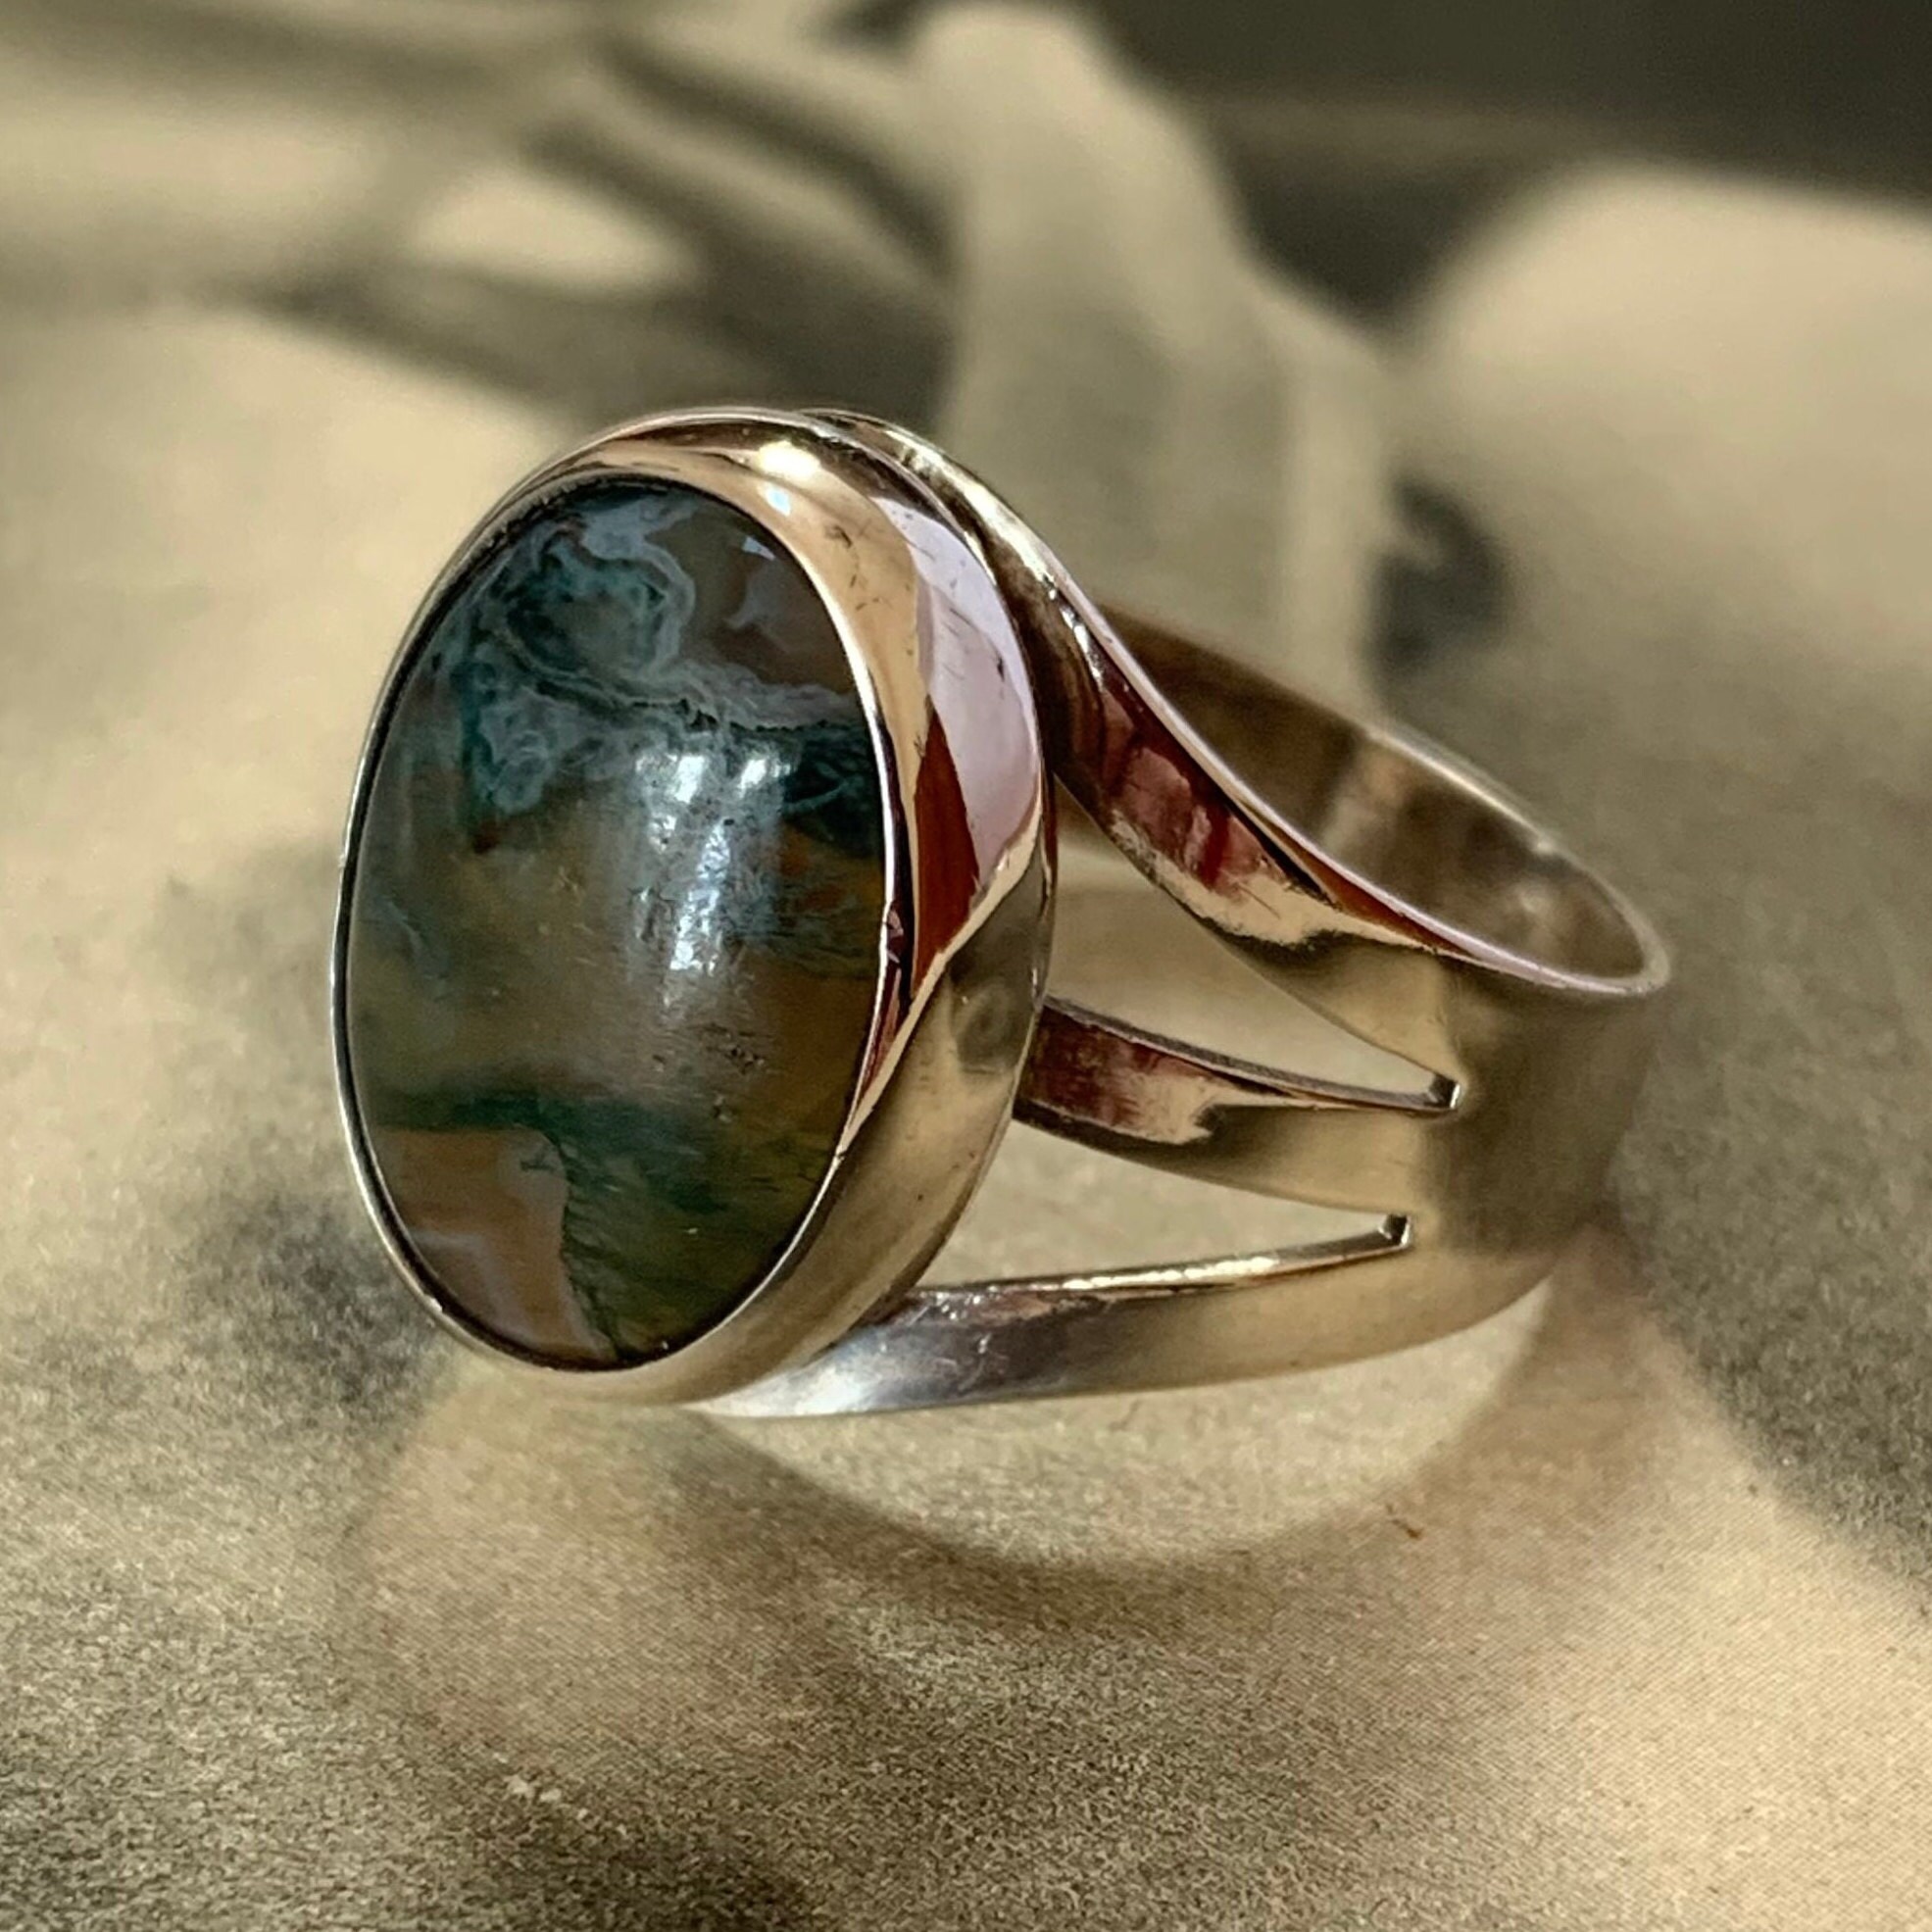 Vintage Handmade Sterling Silver Agate Ring. Bezel Set With Tri Split Shoulders The Stone Has Wonderful Shades Of Green & Brown Tones